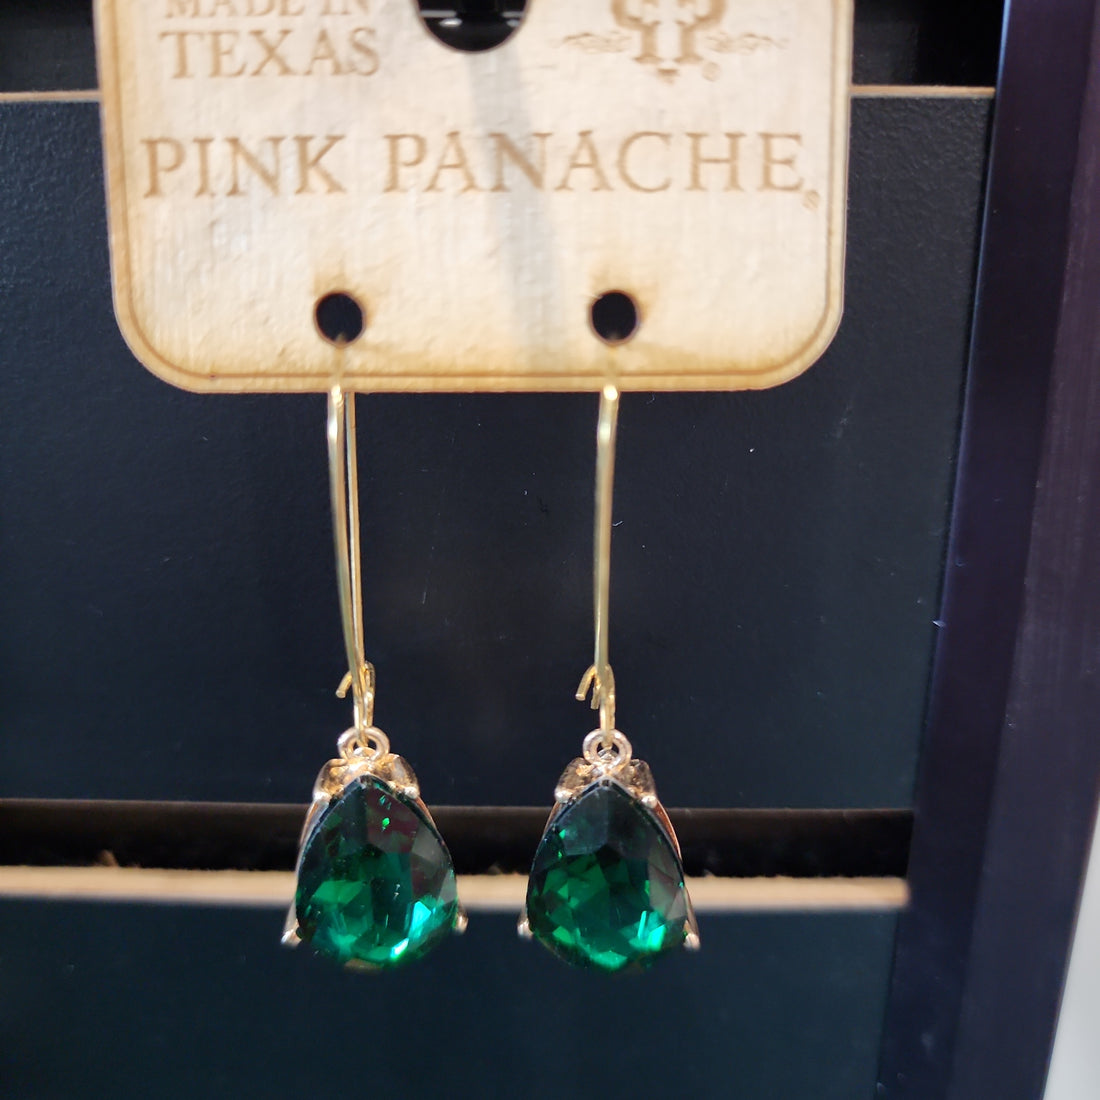 Pink Panache Large Gold/Green Oval Earrings